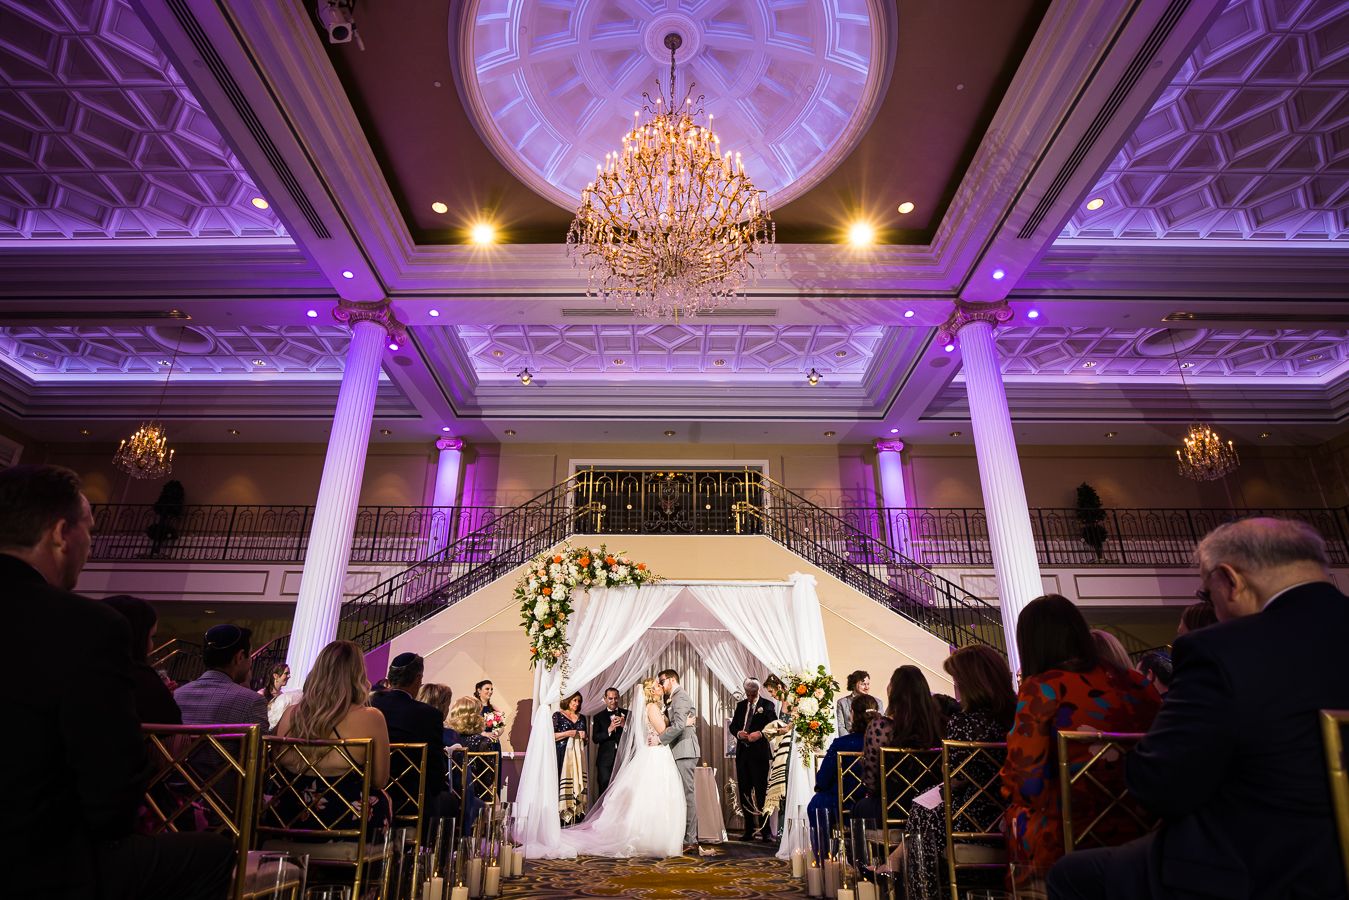 creative NJ Wedding Photographer, rhinehart photography, captures this stunning image of the bride and groom as they kiss one another surrounded by their family and friends inside of the palace at somerset park